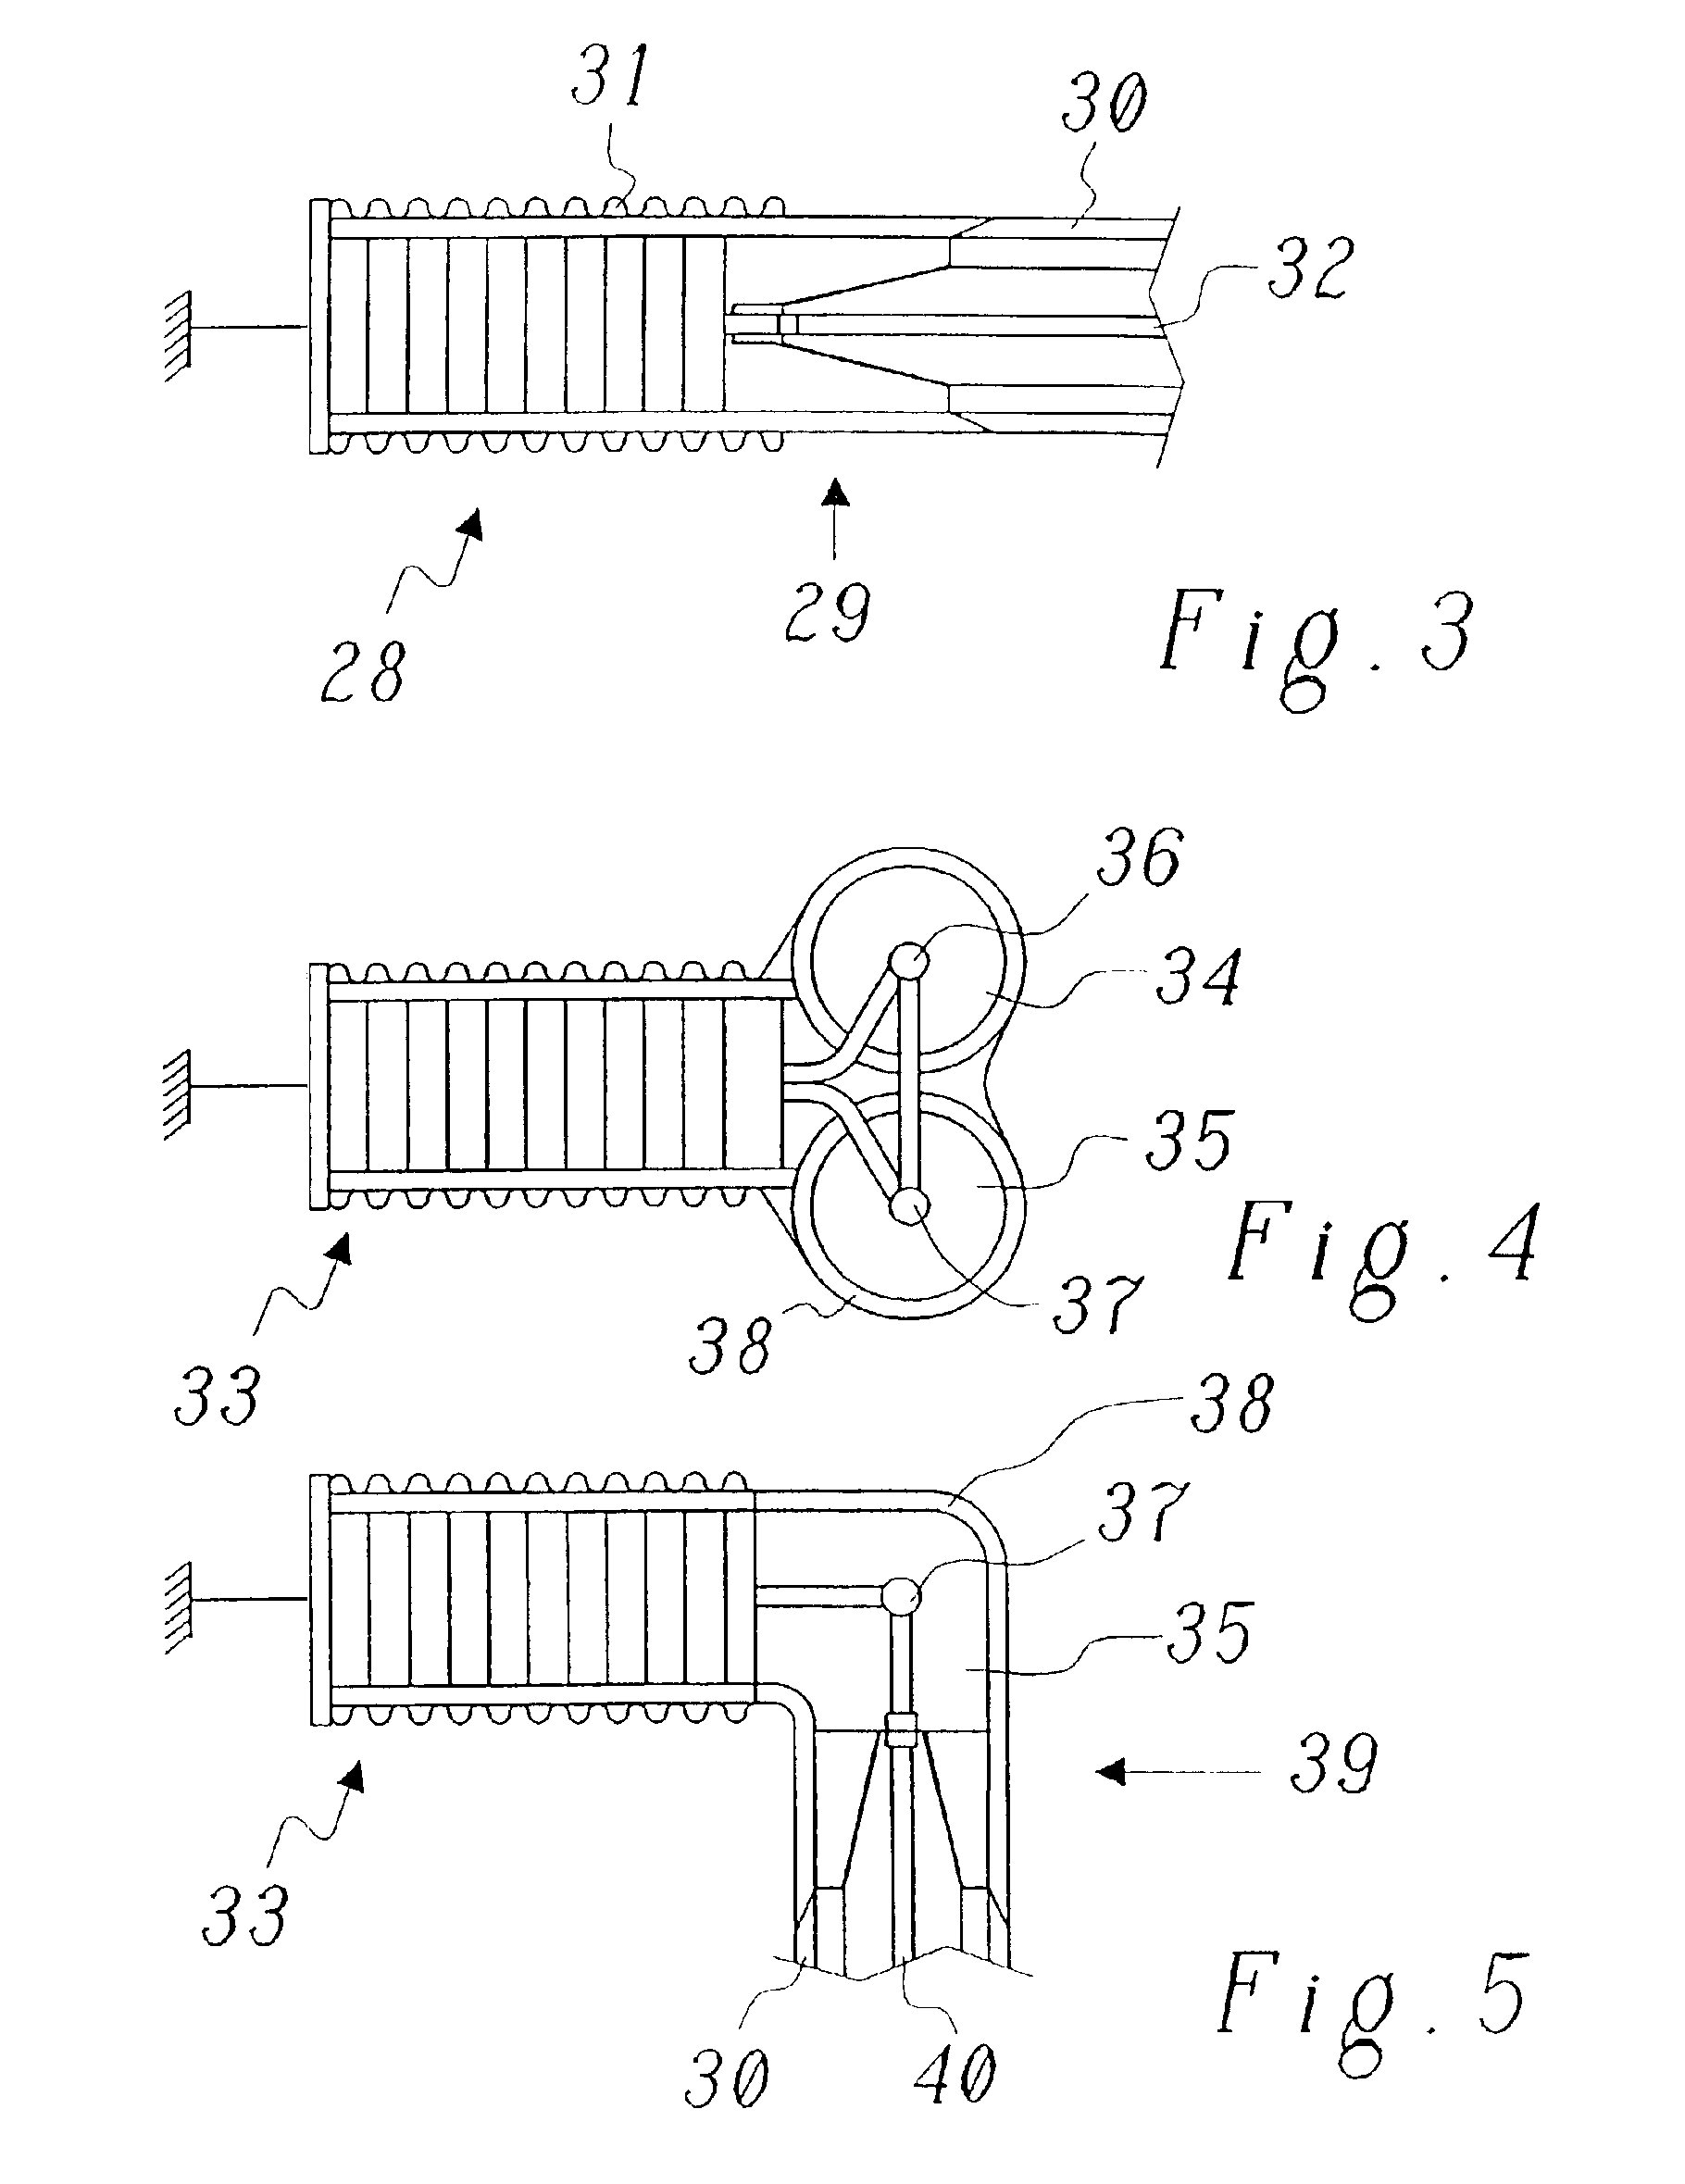 Generator for producing high voltages